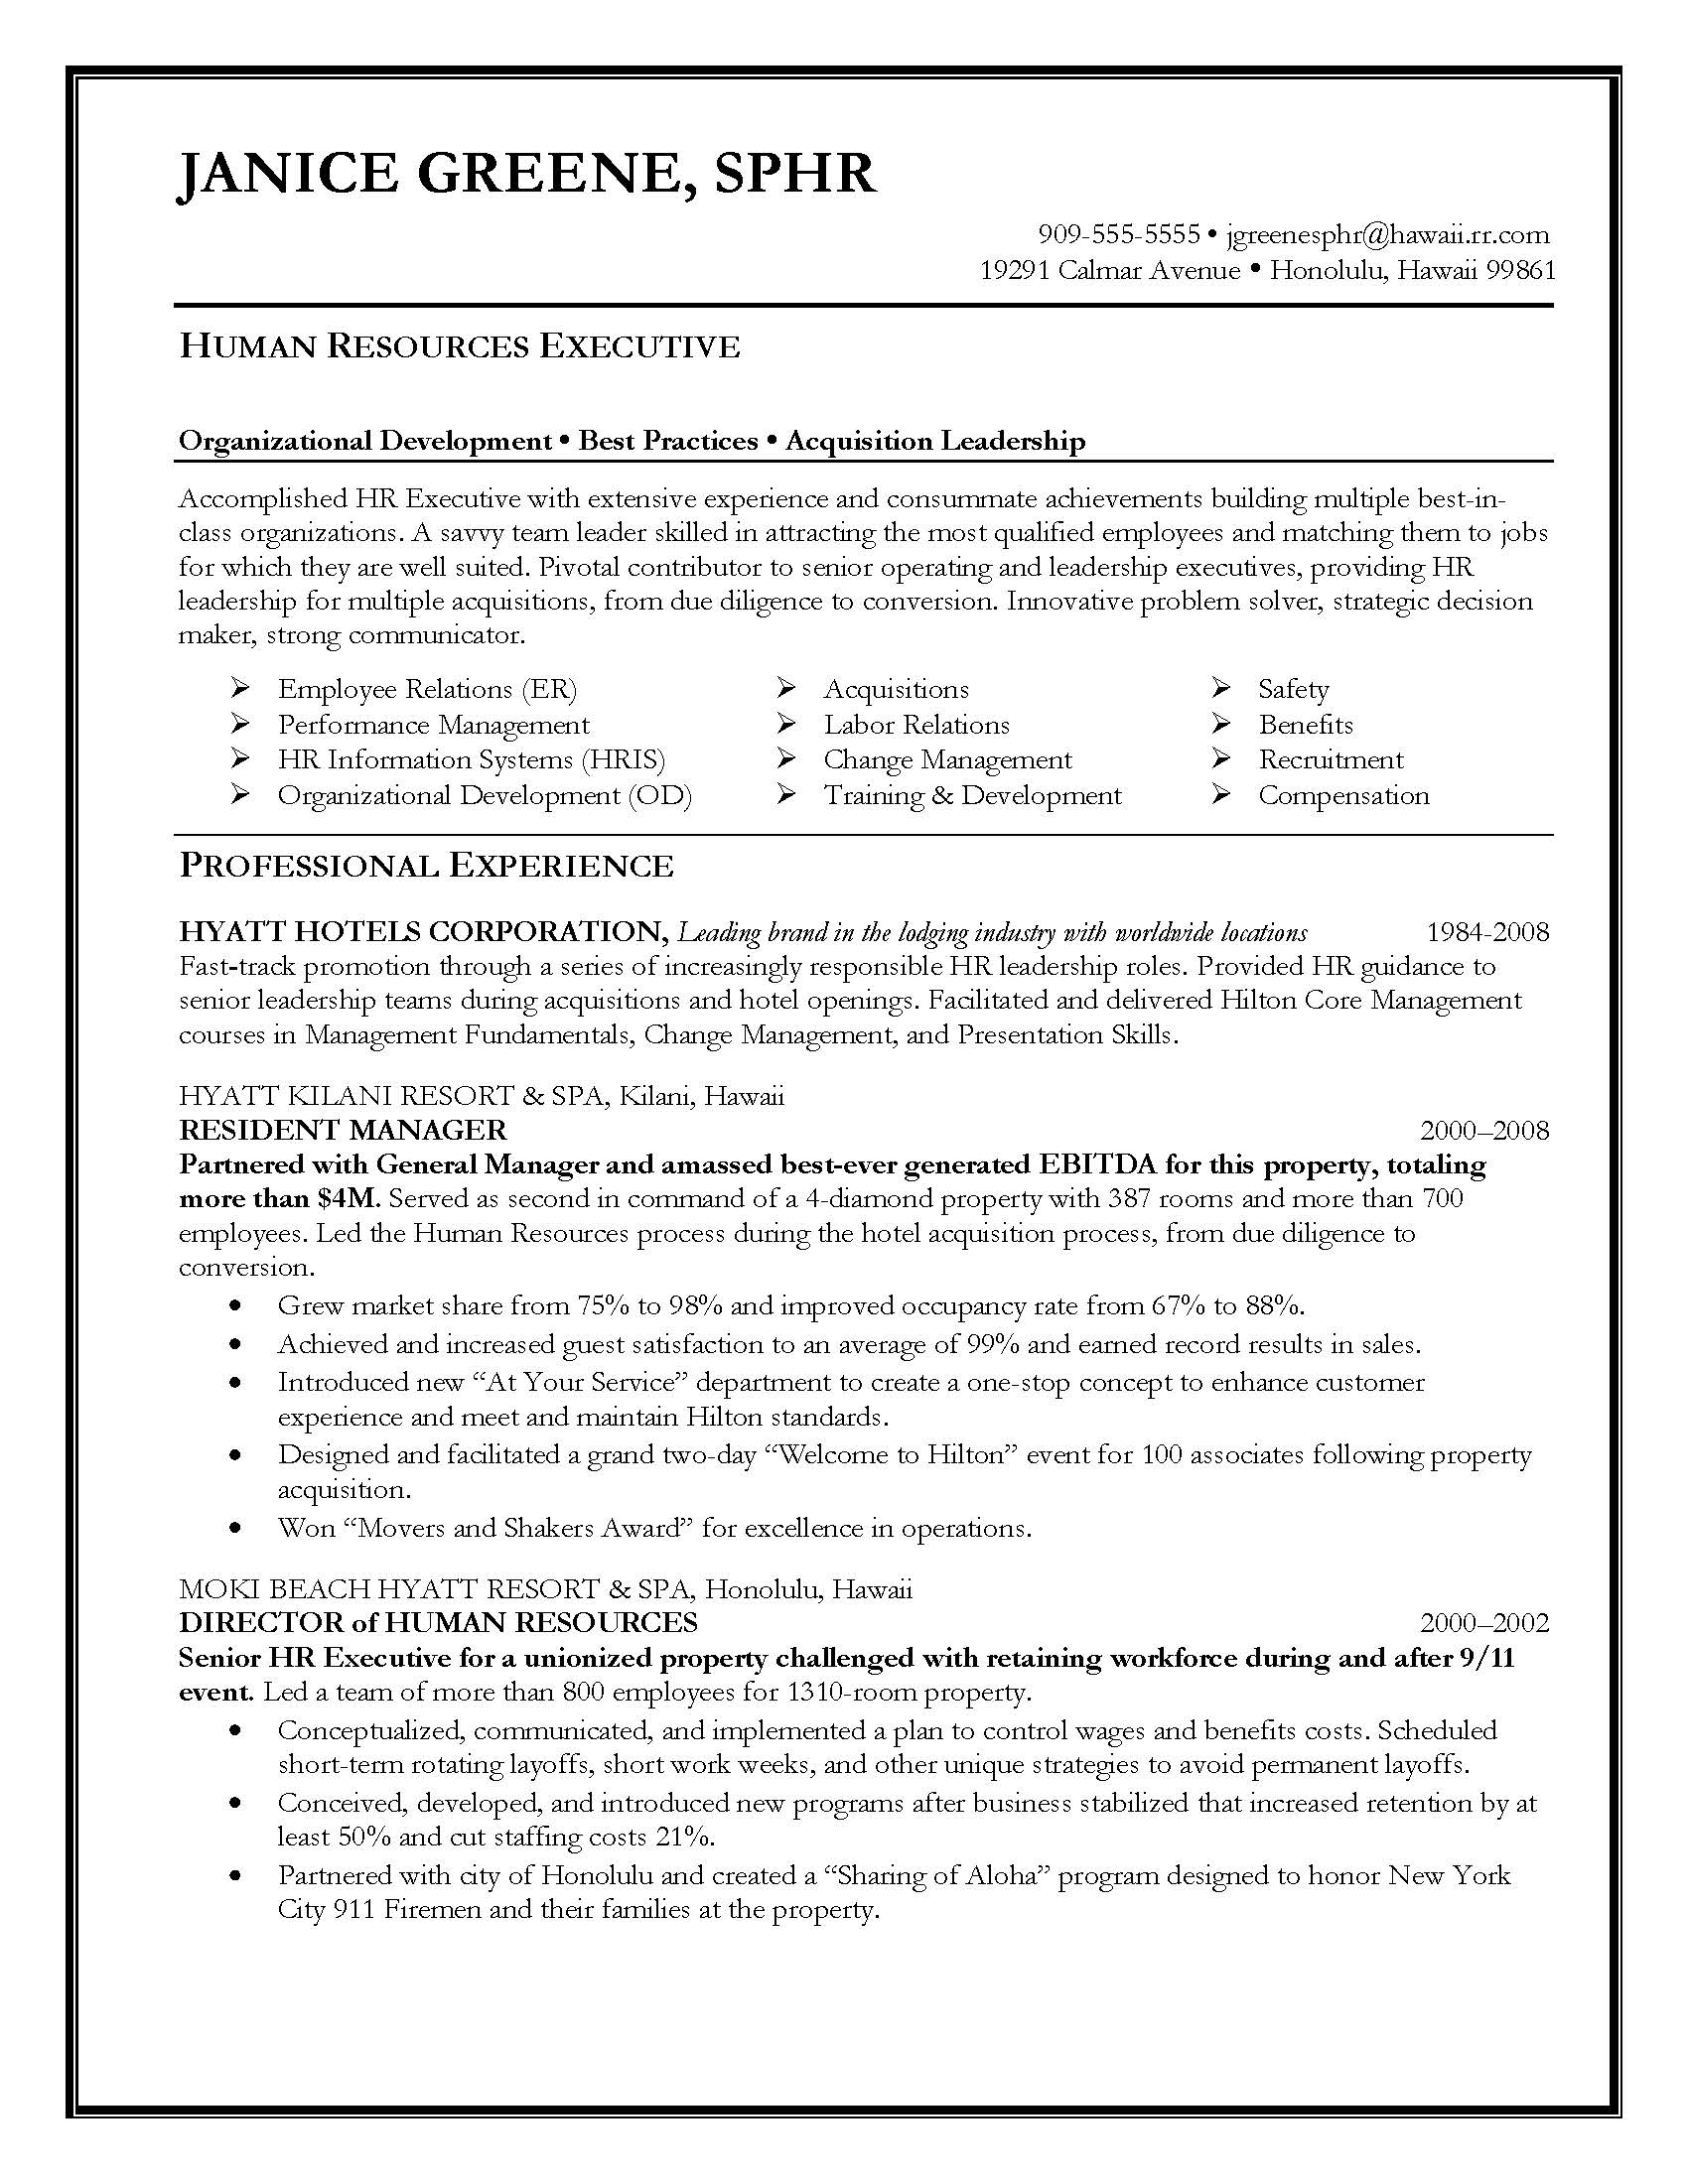 human resources executive resume sample, provided by Elite Resume Writing Services